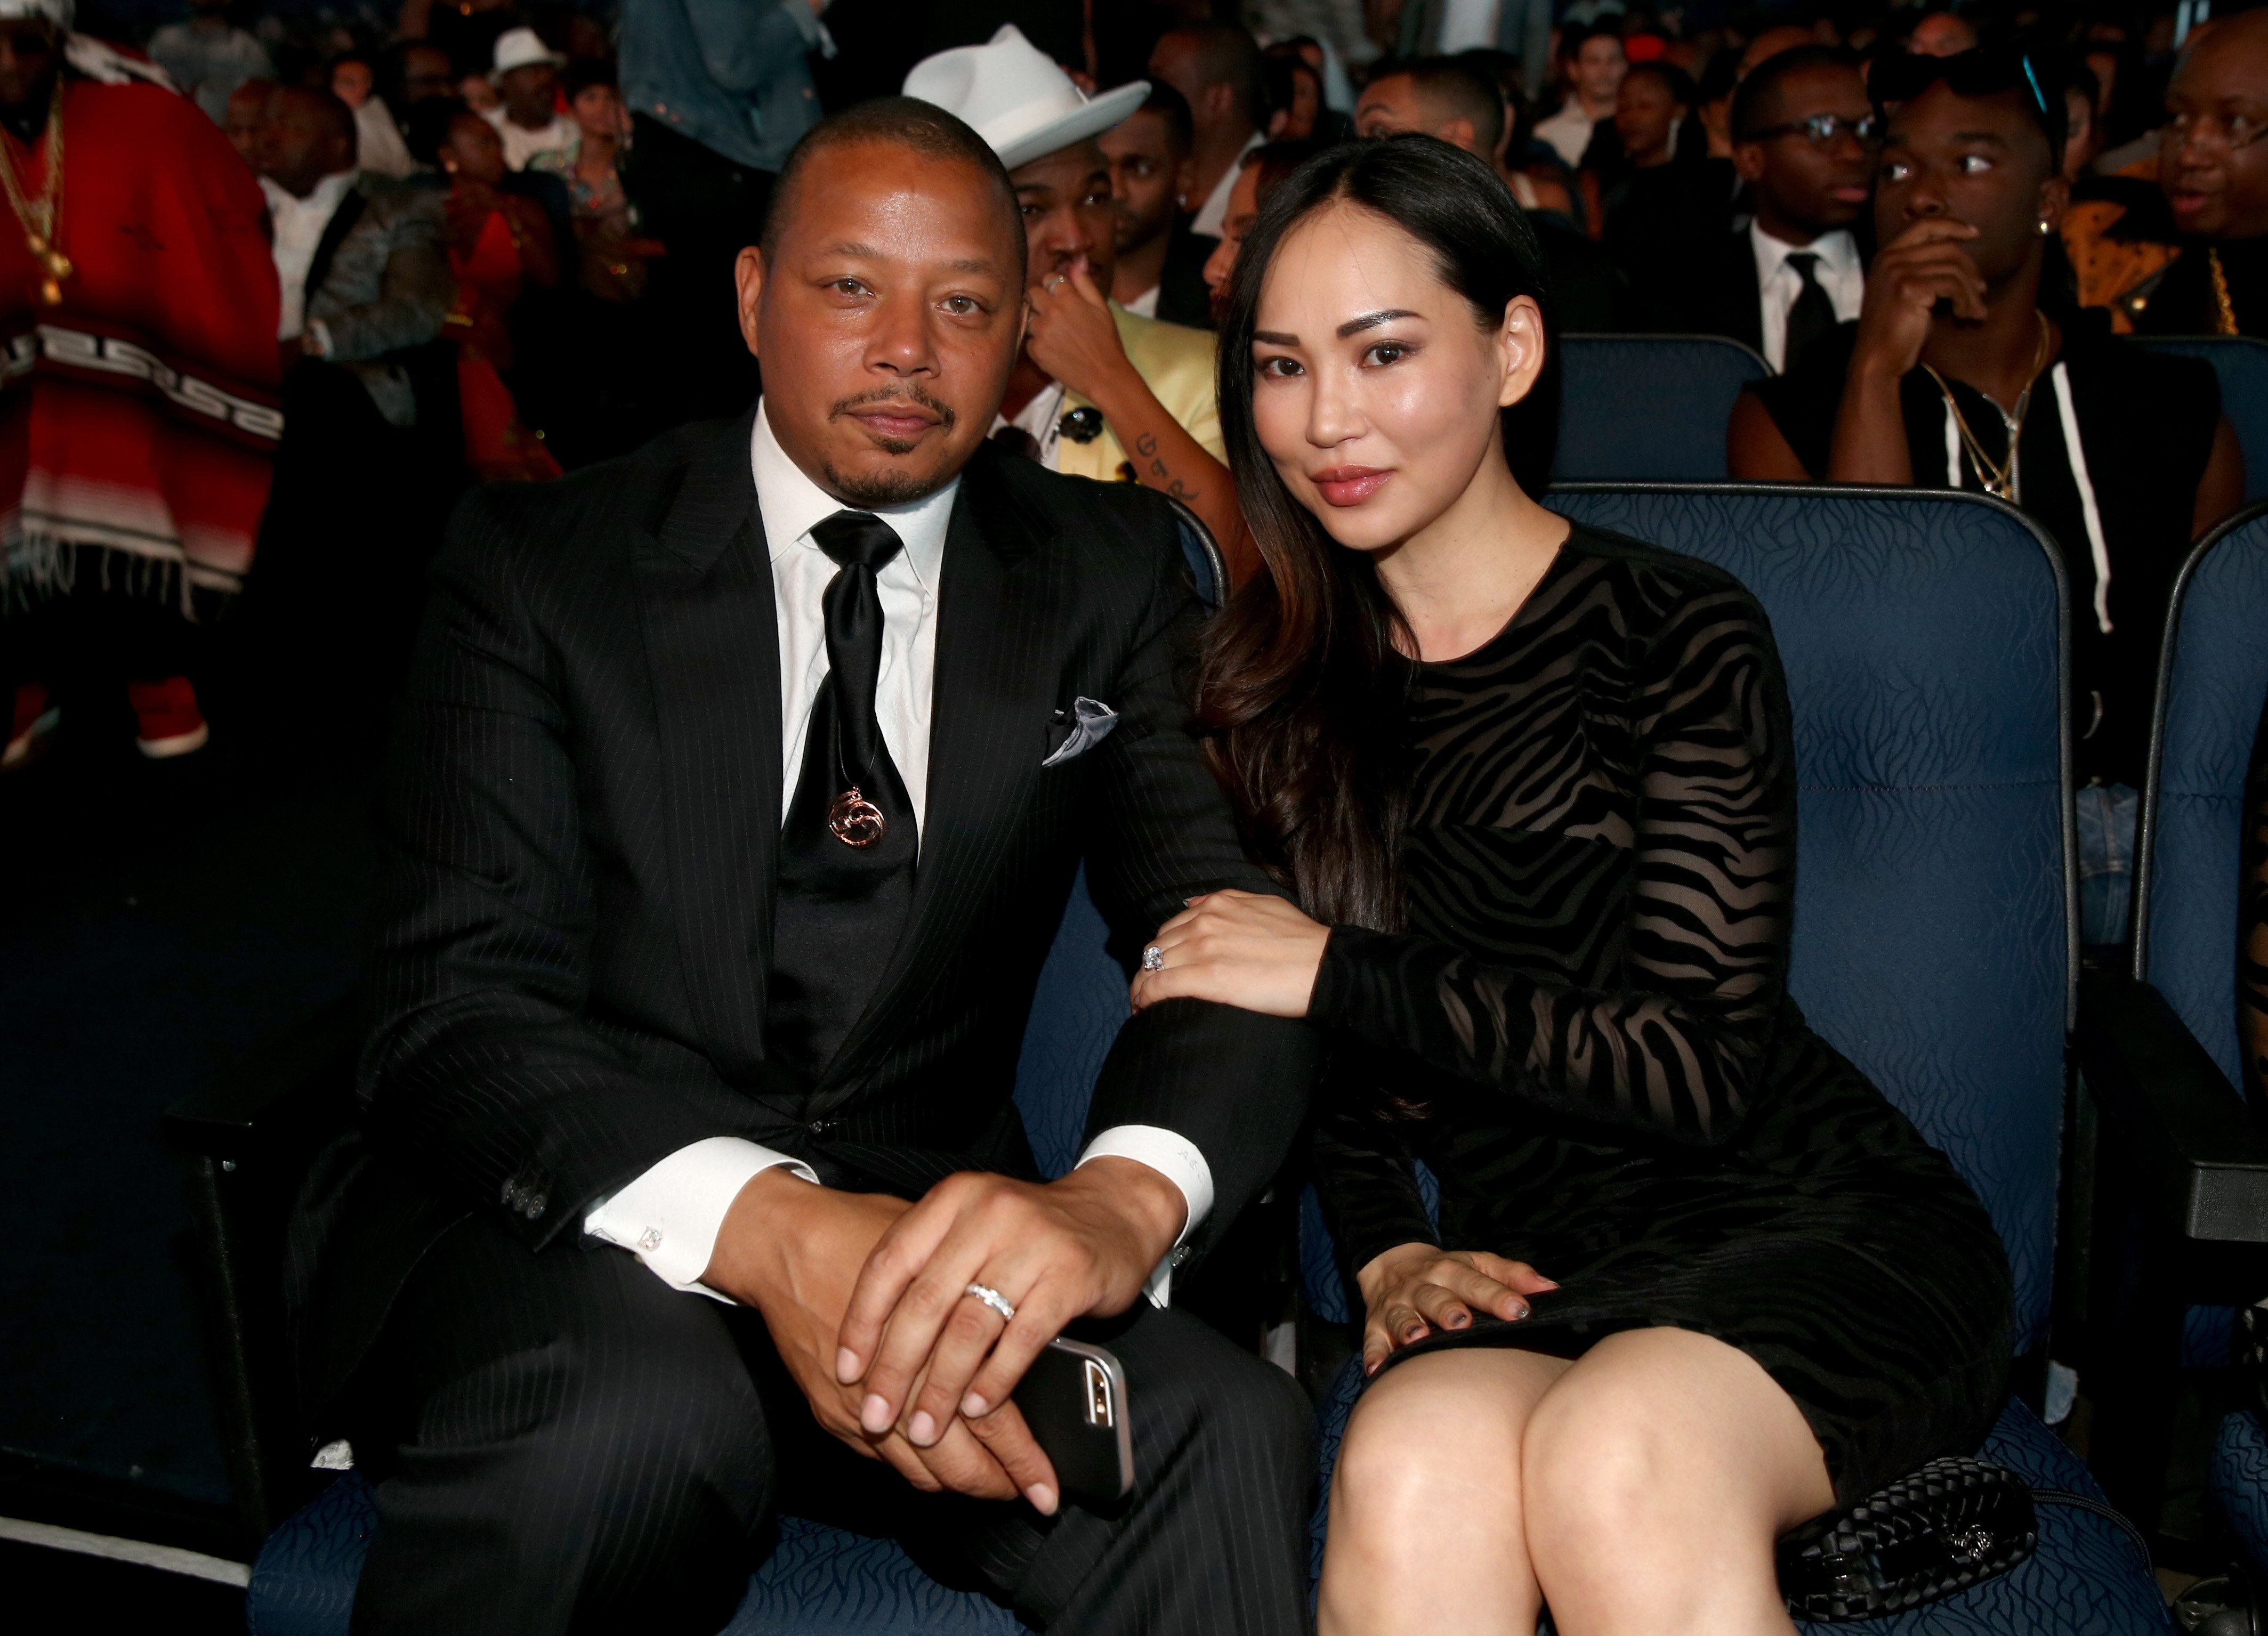 Actor Terrence Howard (L) and Mira Pak attend the 2015 BET Awards at the Microsoft Theater on June 28, 2015, in Los Angeles, California. | Source: Getty Images